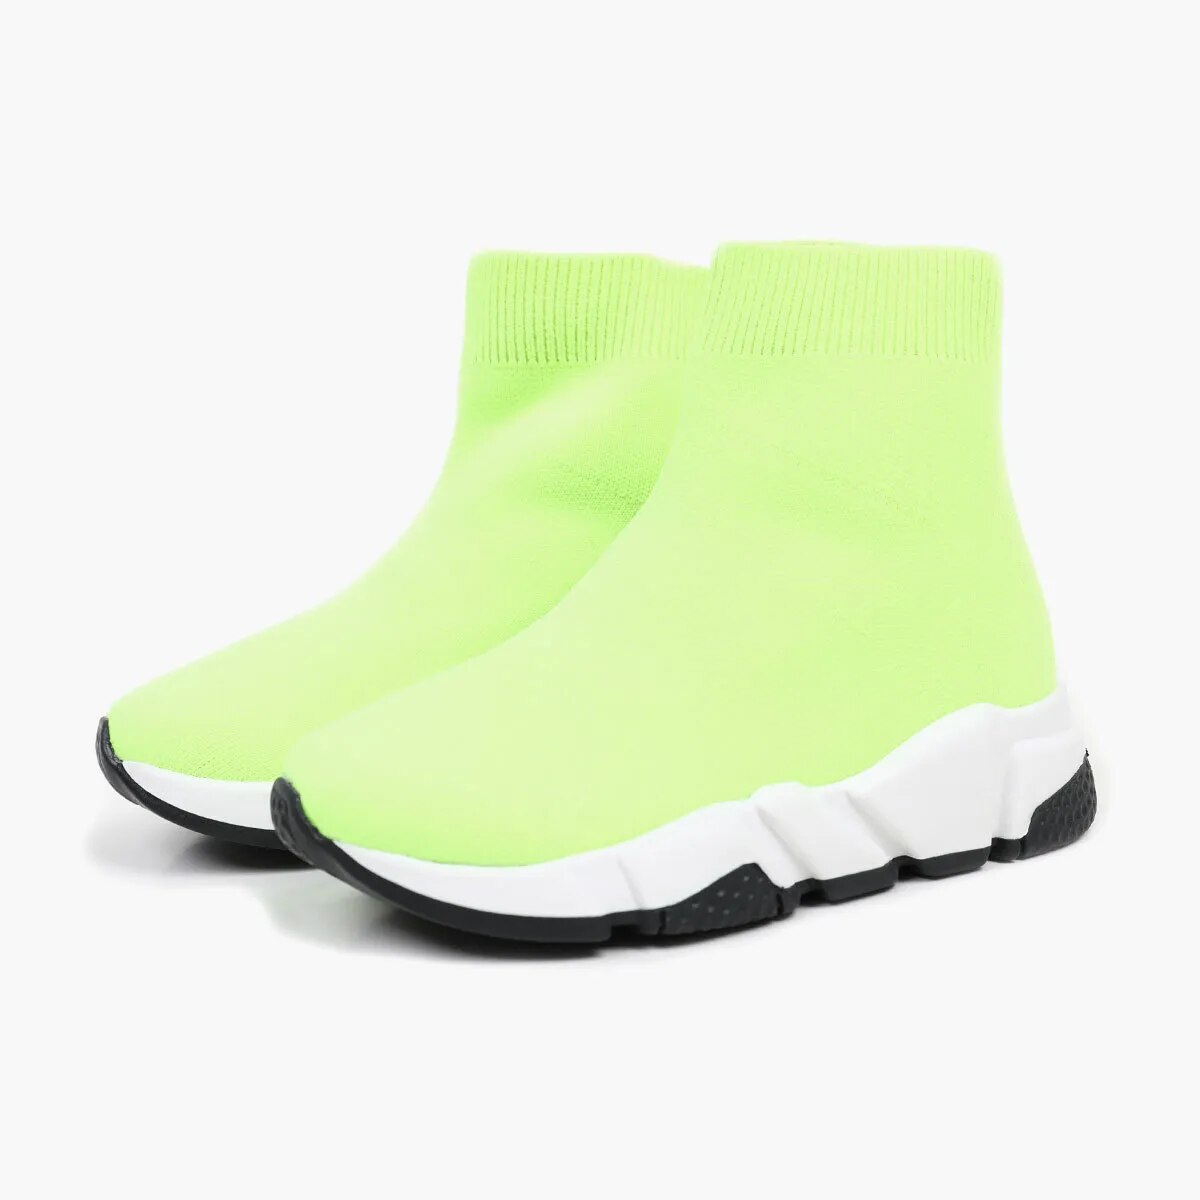 Luxury Vintage Platform Most Comfortable Sneakers For Women And Men Flat  Casual Socks Trainers In Black, White, Red, Beige Knit Ideal For Outdoor  Sports Available In Sizes 38 44 From Ifashion0612, $79.05 | DHgate.Com